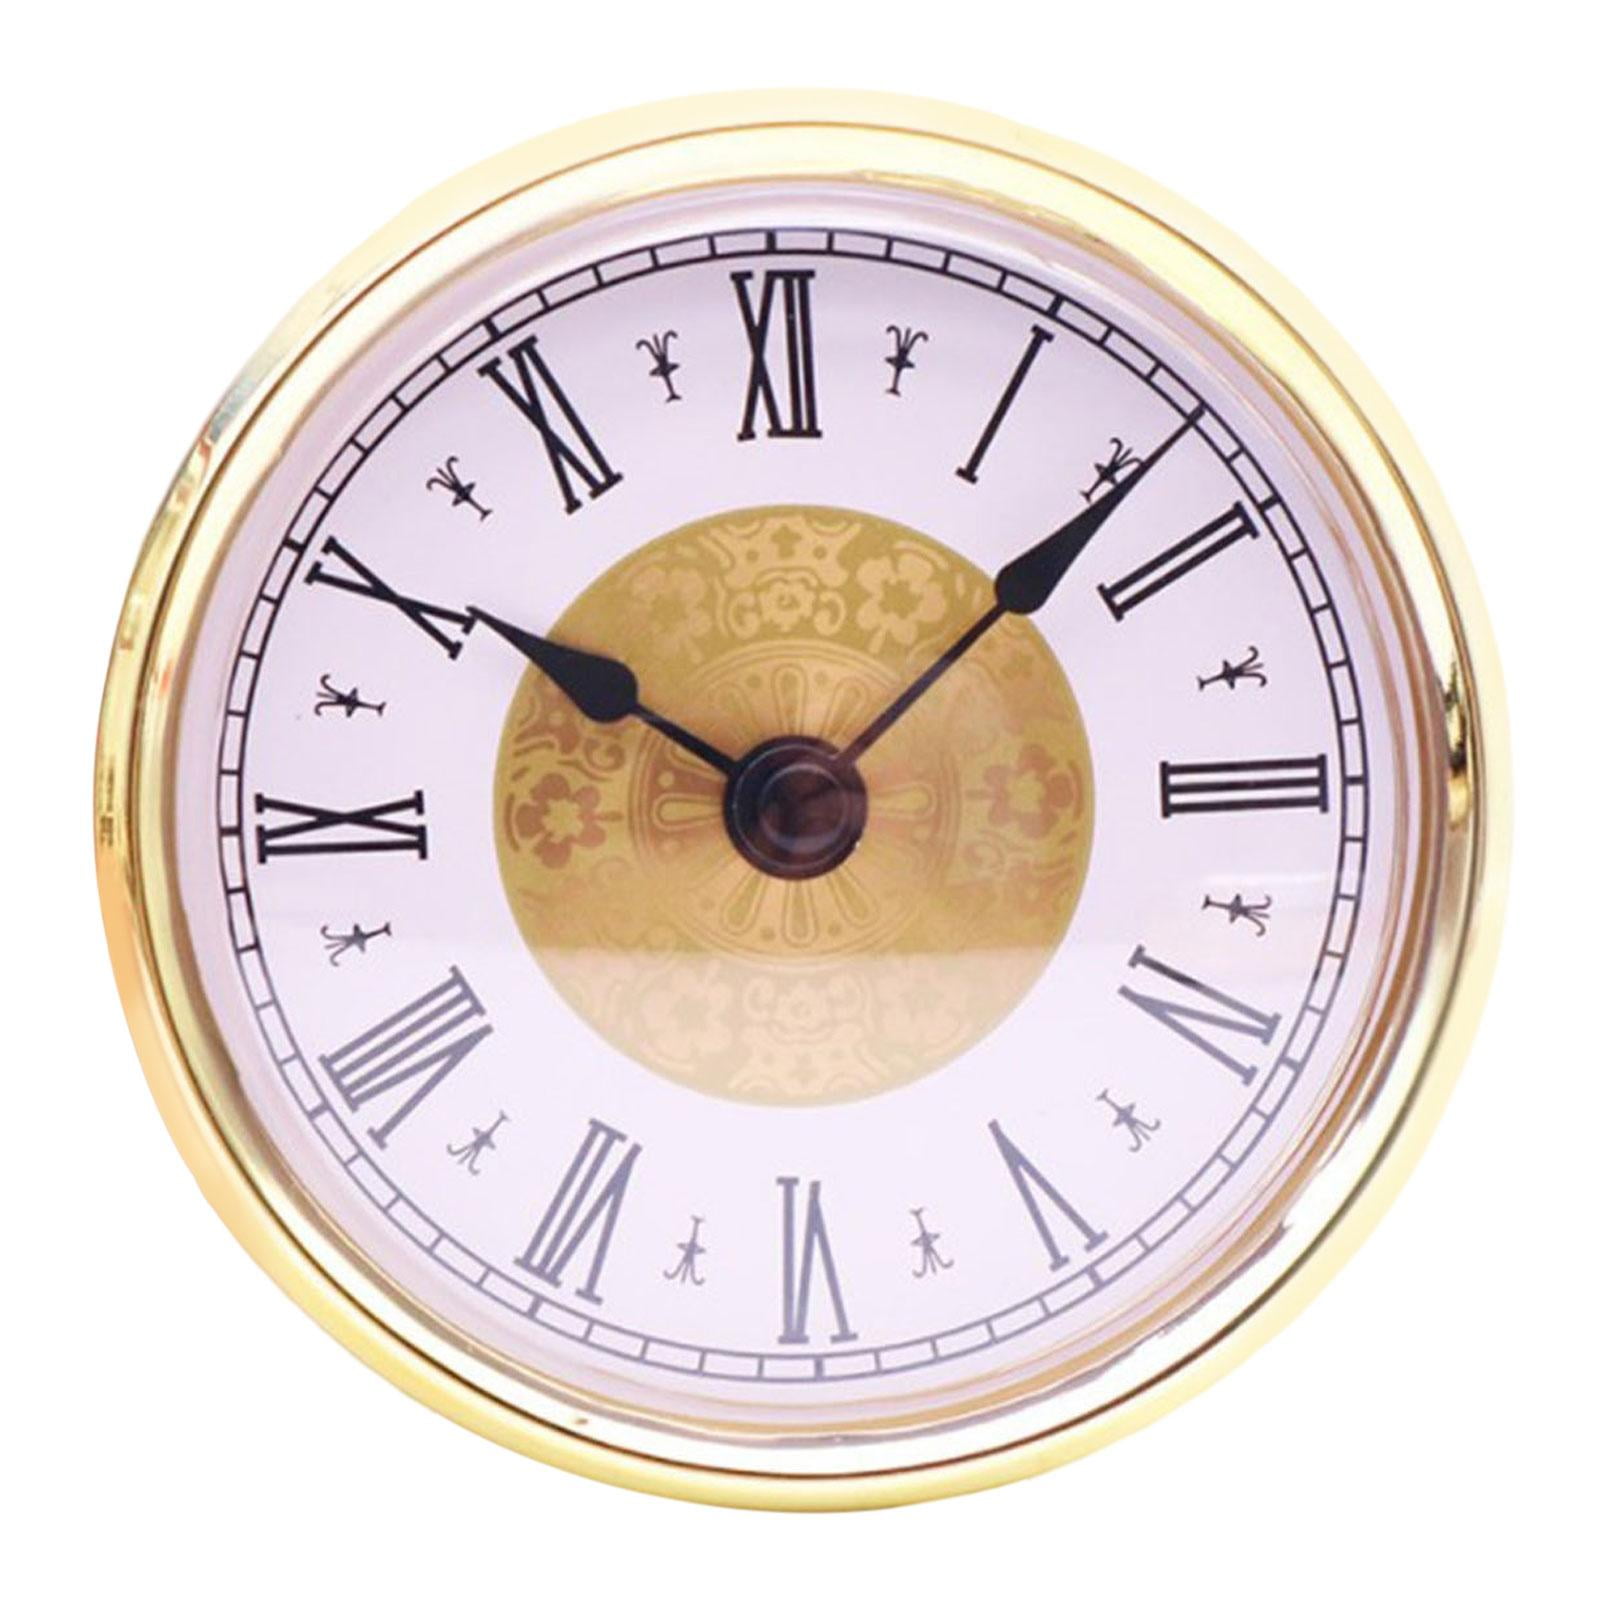 New Round 80mm Metal Clock Dial Face Black Roman Numerals Gold & White Face 